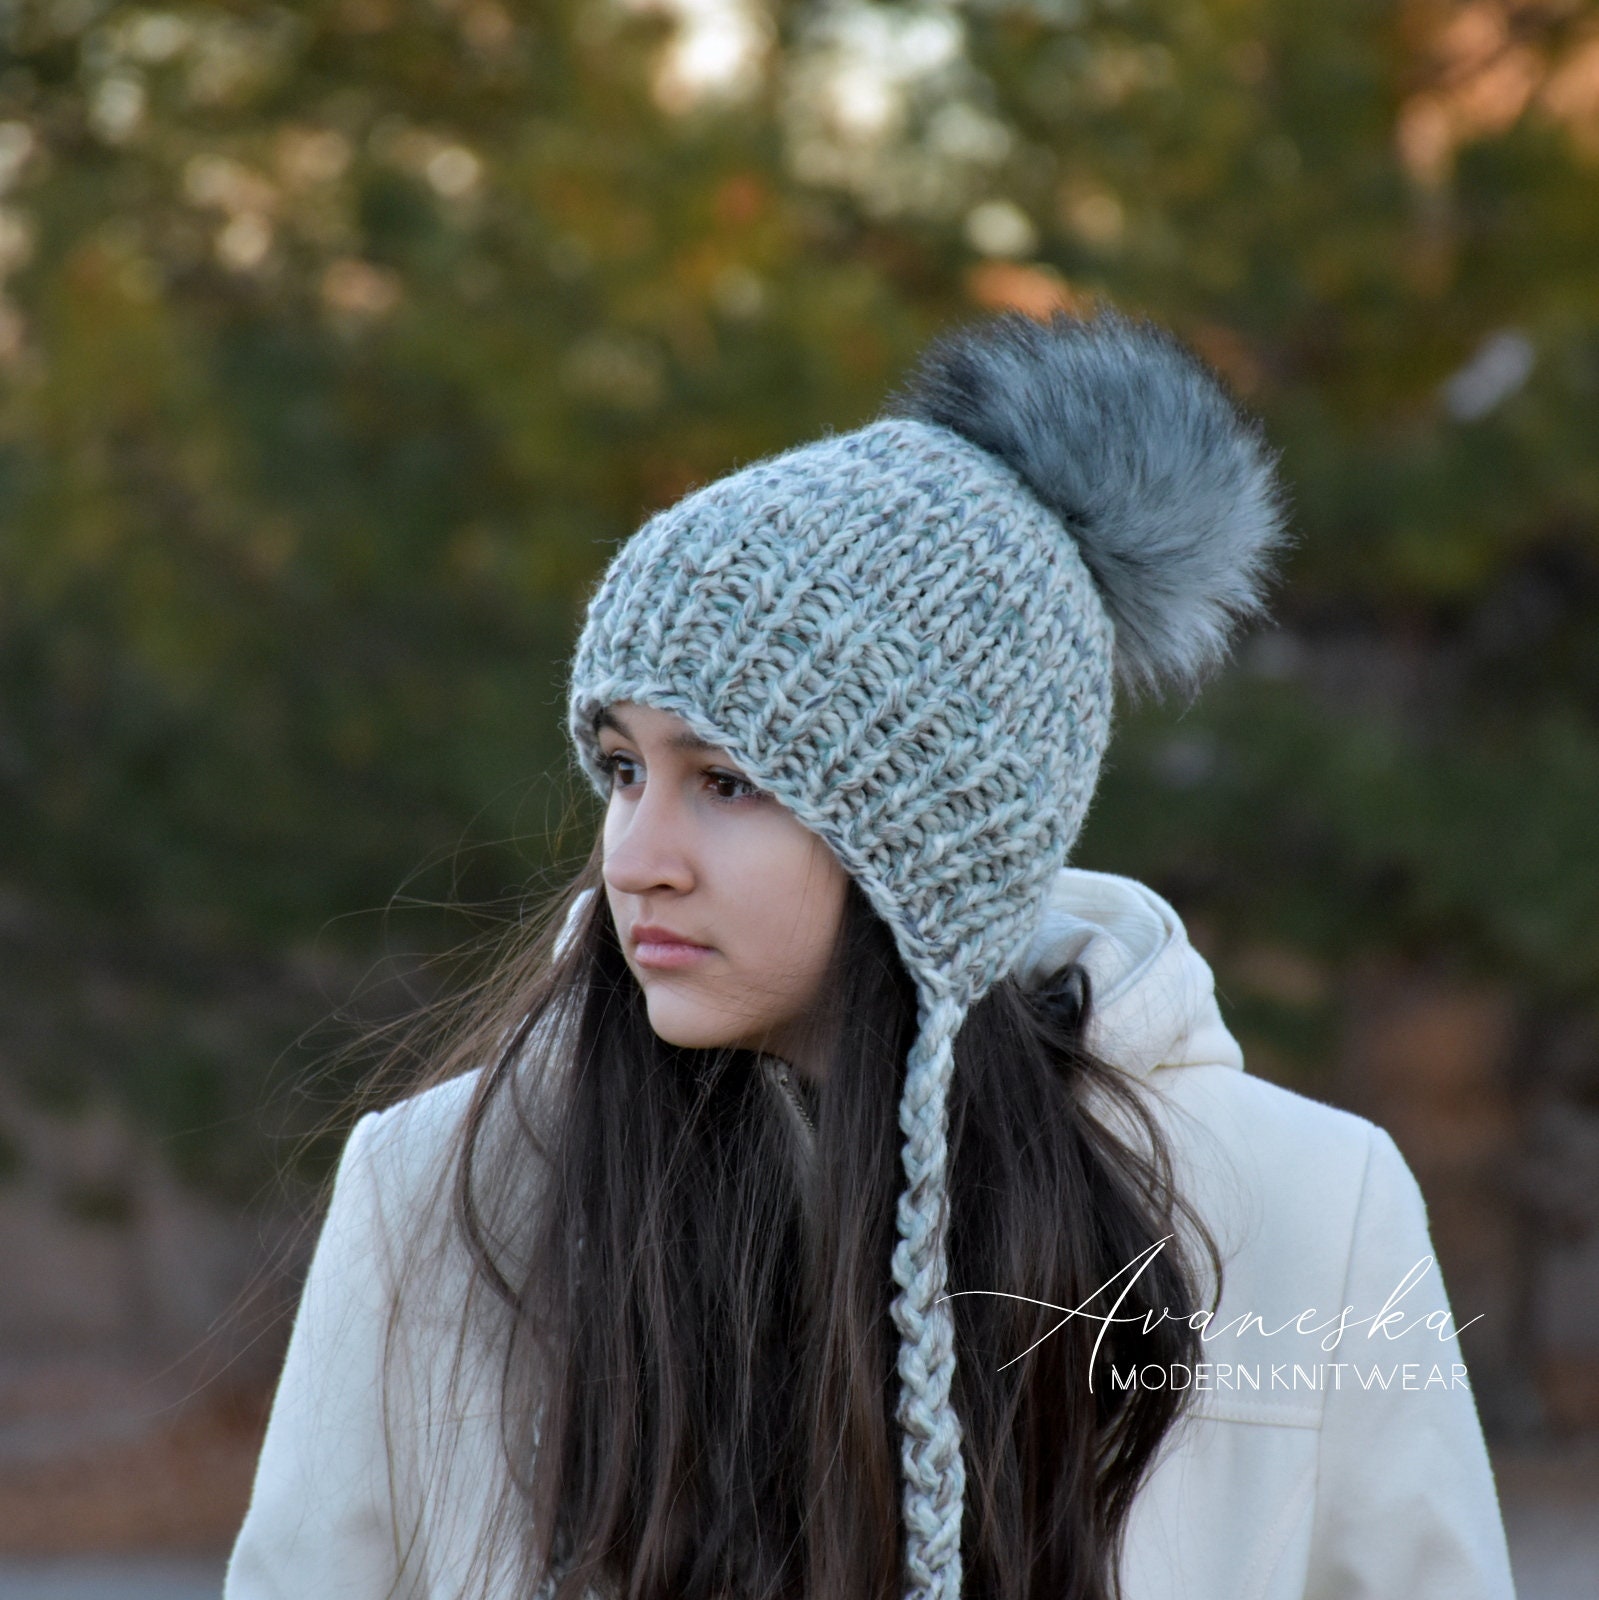 Cashmere Double Pom Pom Hat, Beanie, Knit Hat, Cozy and Super Soft Women  and Girls Winter Hat 